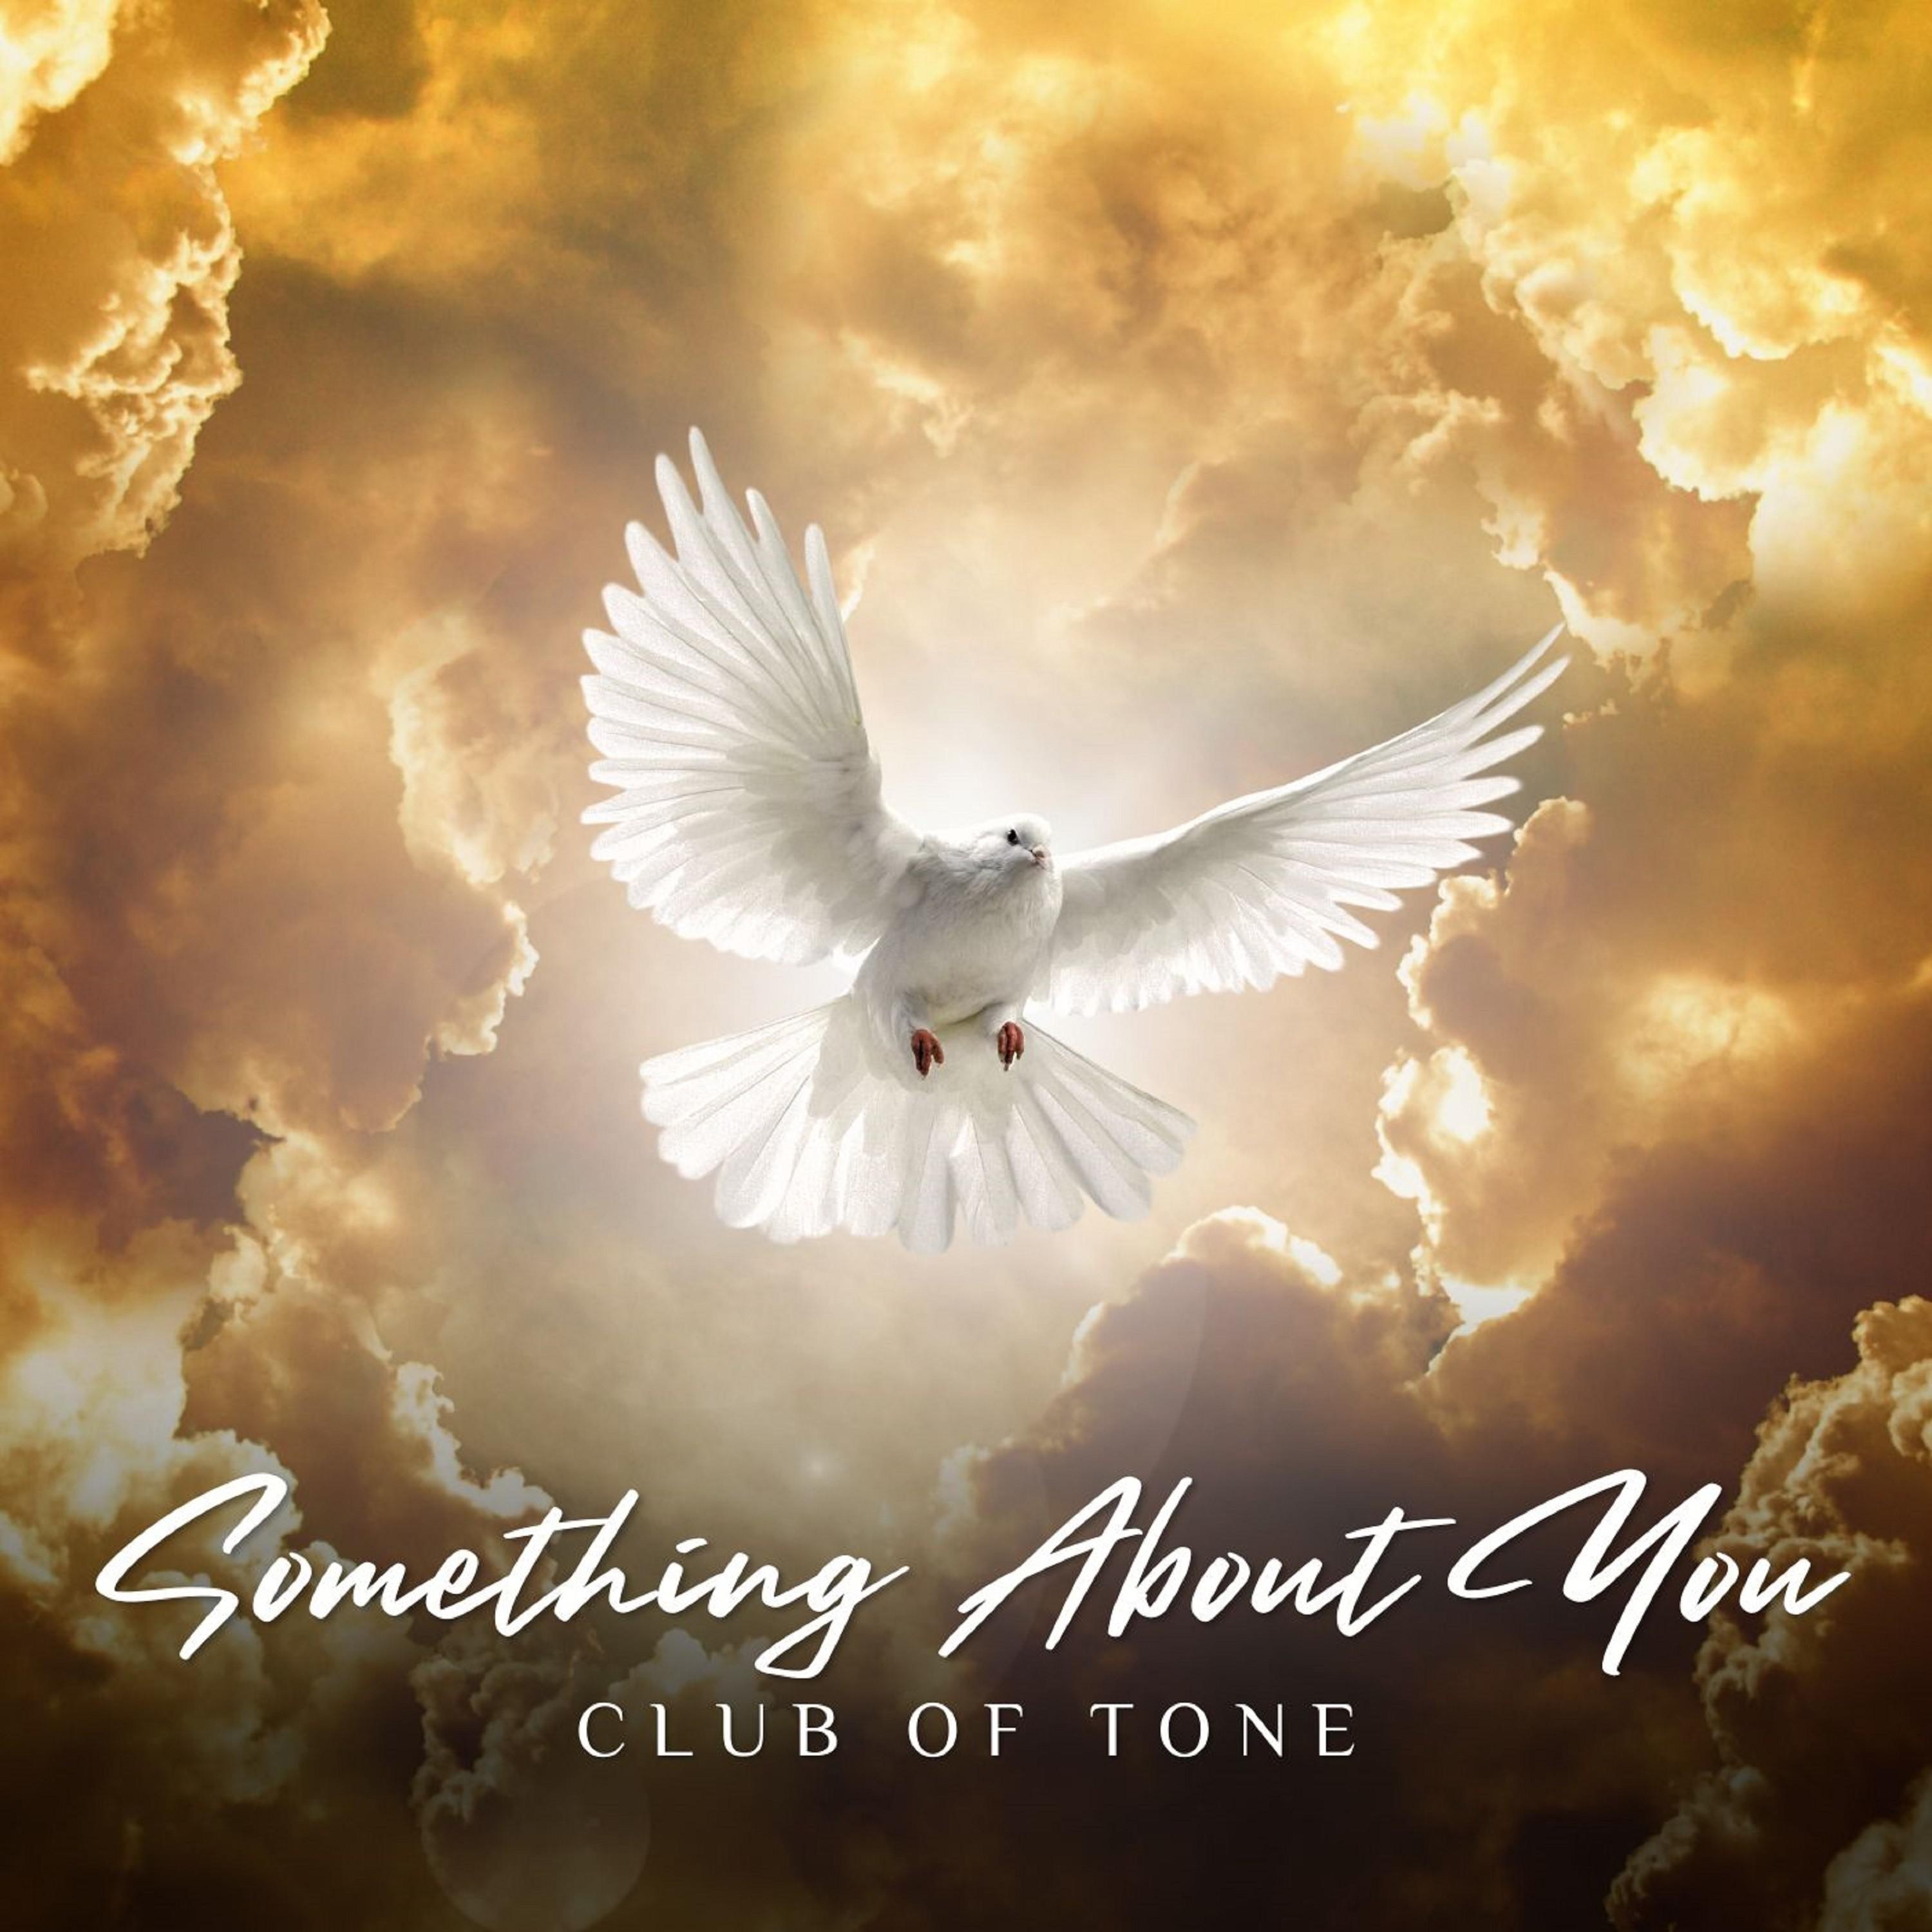 Club of Tone - Something About You